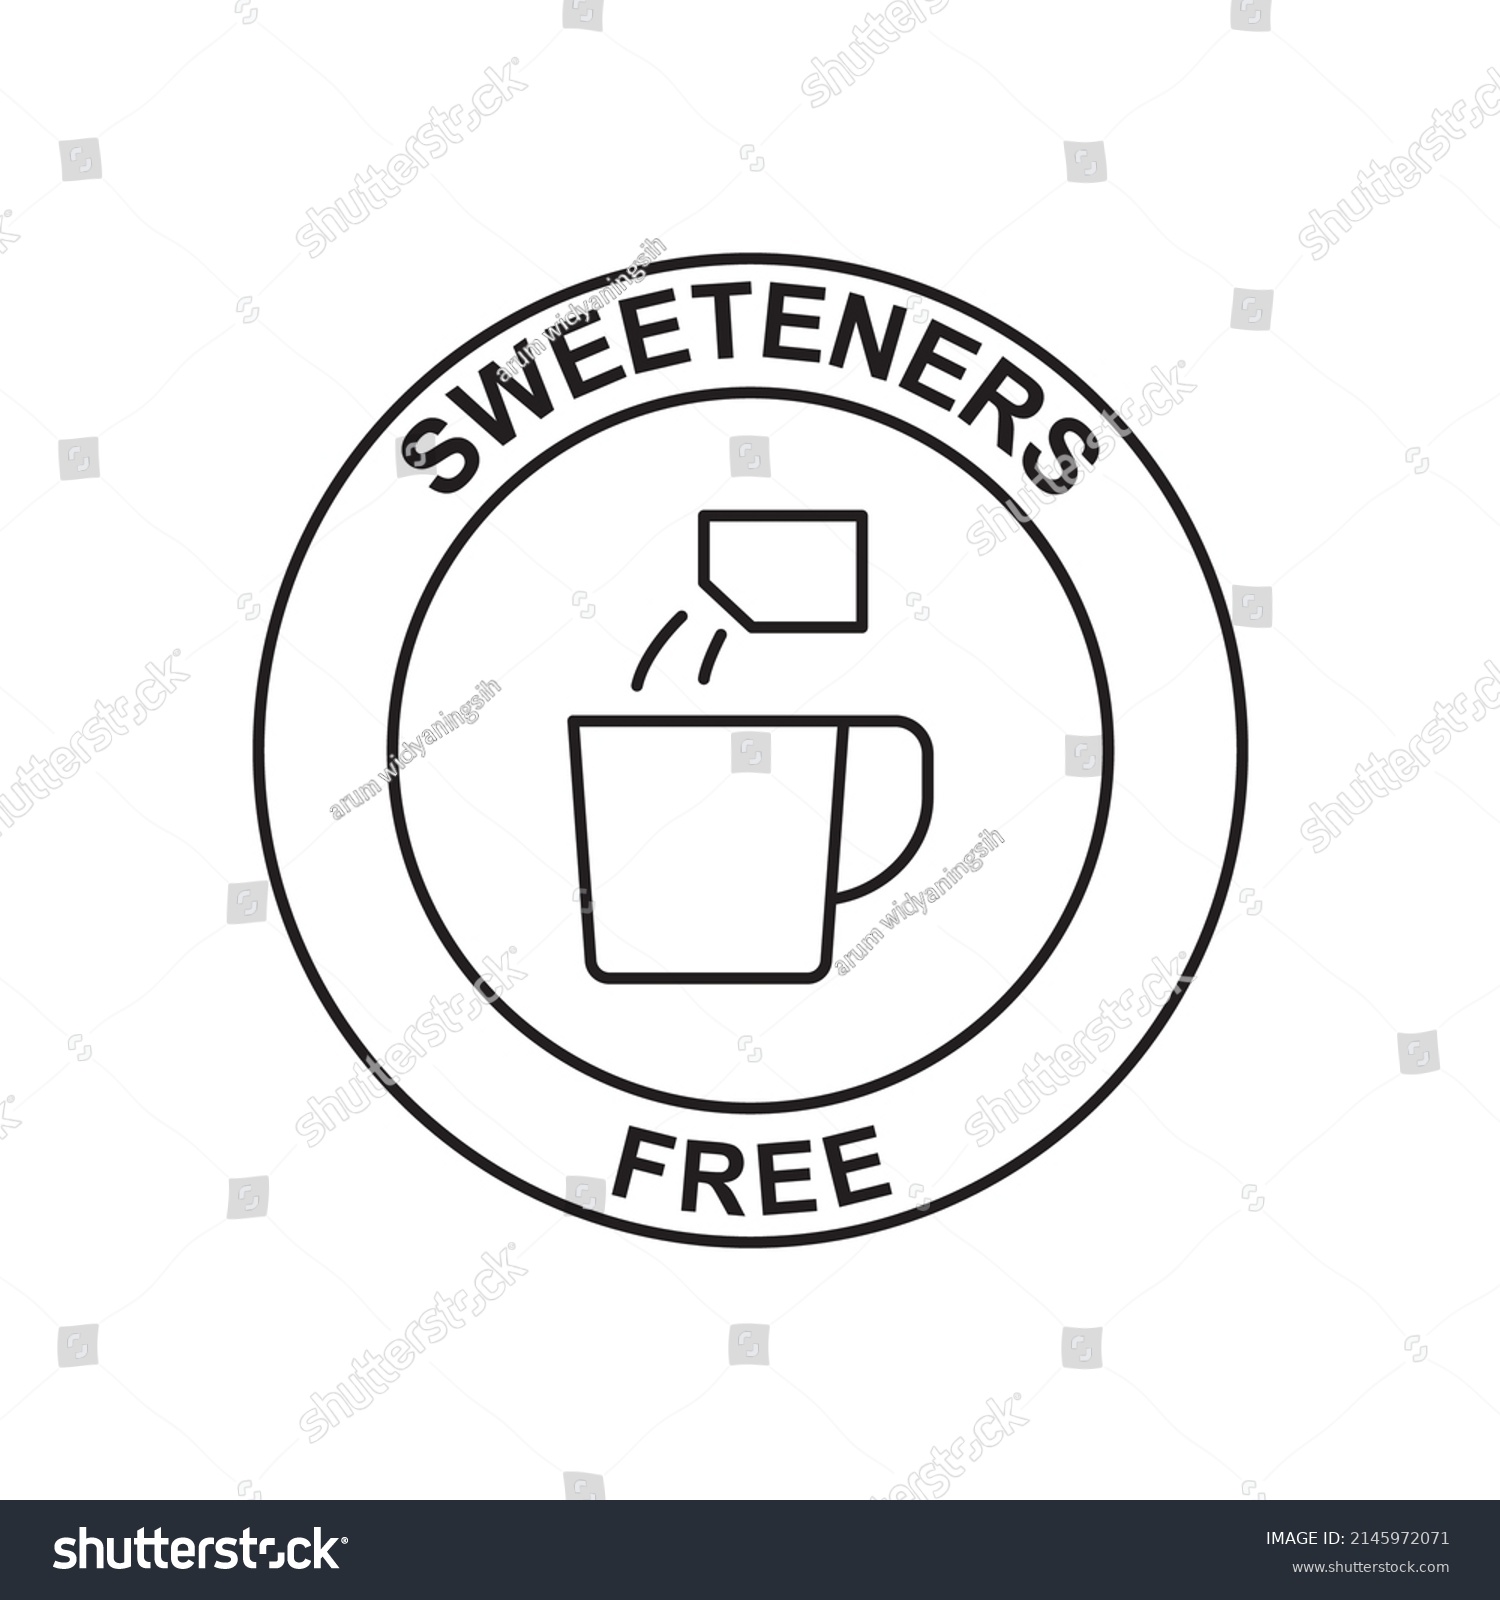 SVG of Sweeteners free label icon in black line style icon, style isolated on white background svg